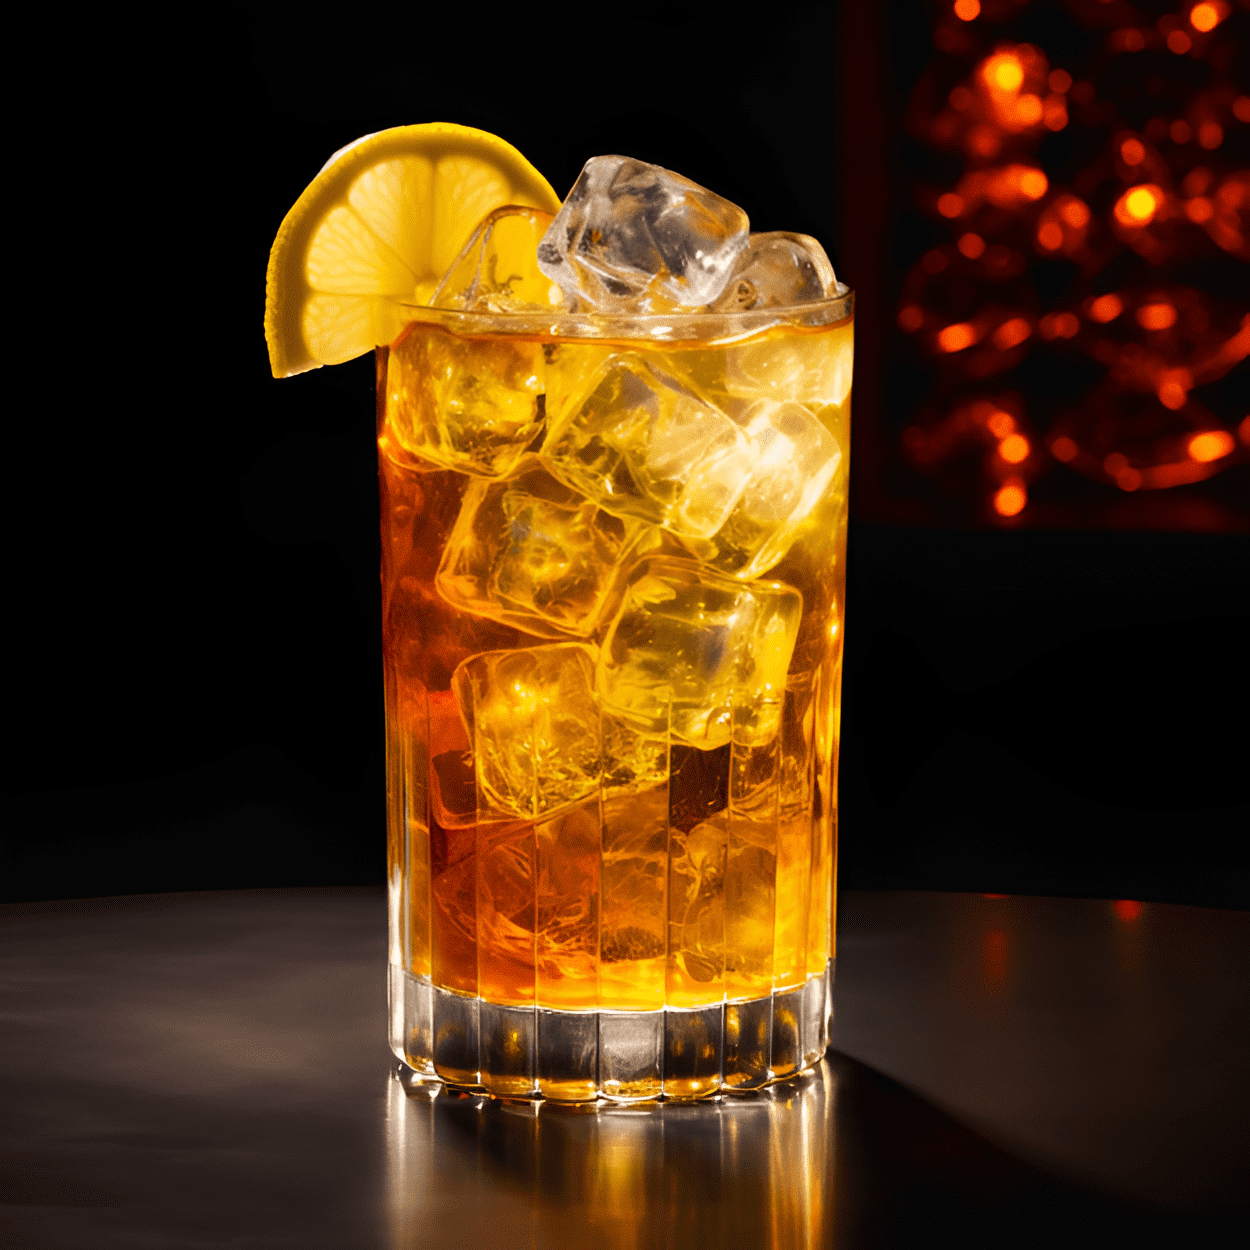 Hennessy Hustle Cocktail Recipe - The Hennessy Hustle is a well-balanced cocktail with a smooth, rich taste. The sweetness of the honey perfectly complements the tartness of the lemon, while the Hennessy adds a deep, complex flavor. It's a strong, full-bodied drink with a hint of sweetness and a refreshing citrus kick.